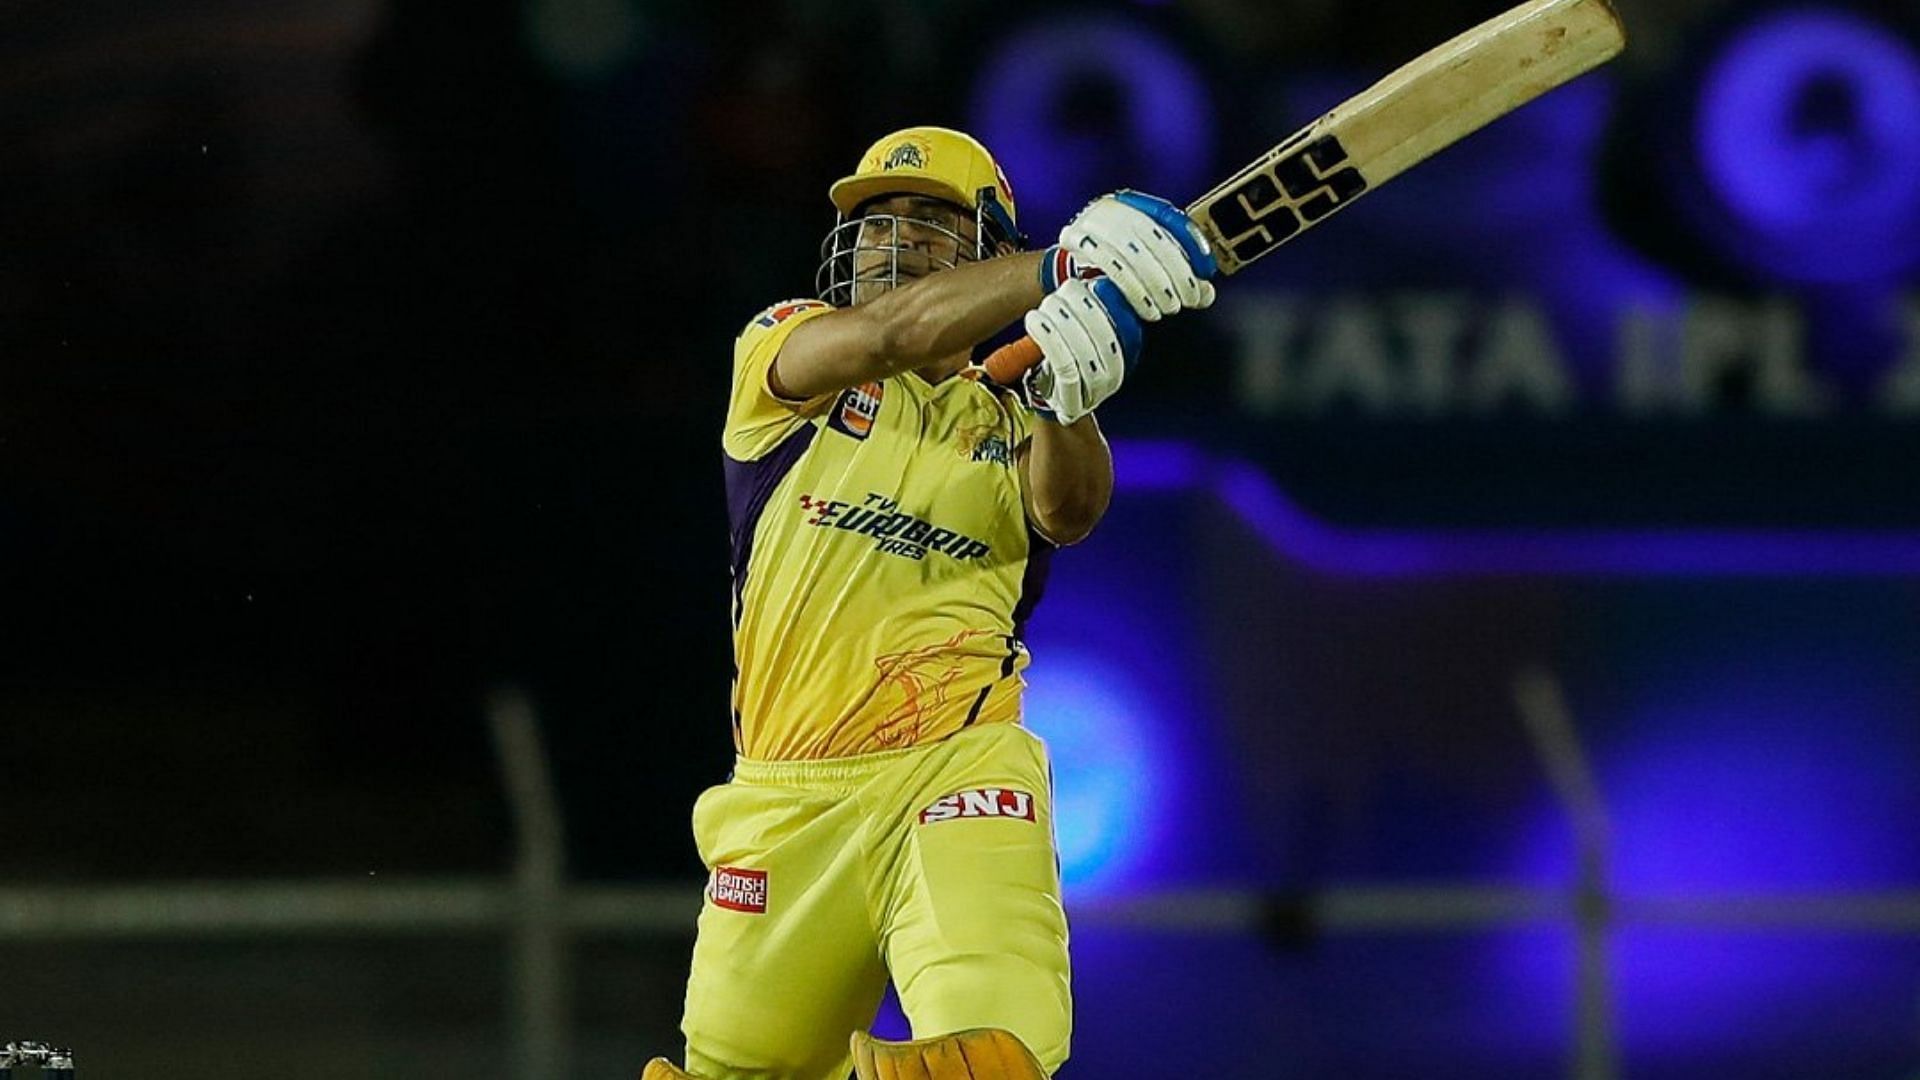 MS Dhoni has shown so far this season that he is still capable of scoring quickly. (P.C.:iplt20.com)